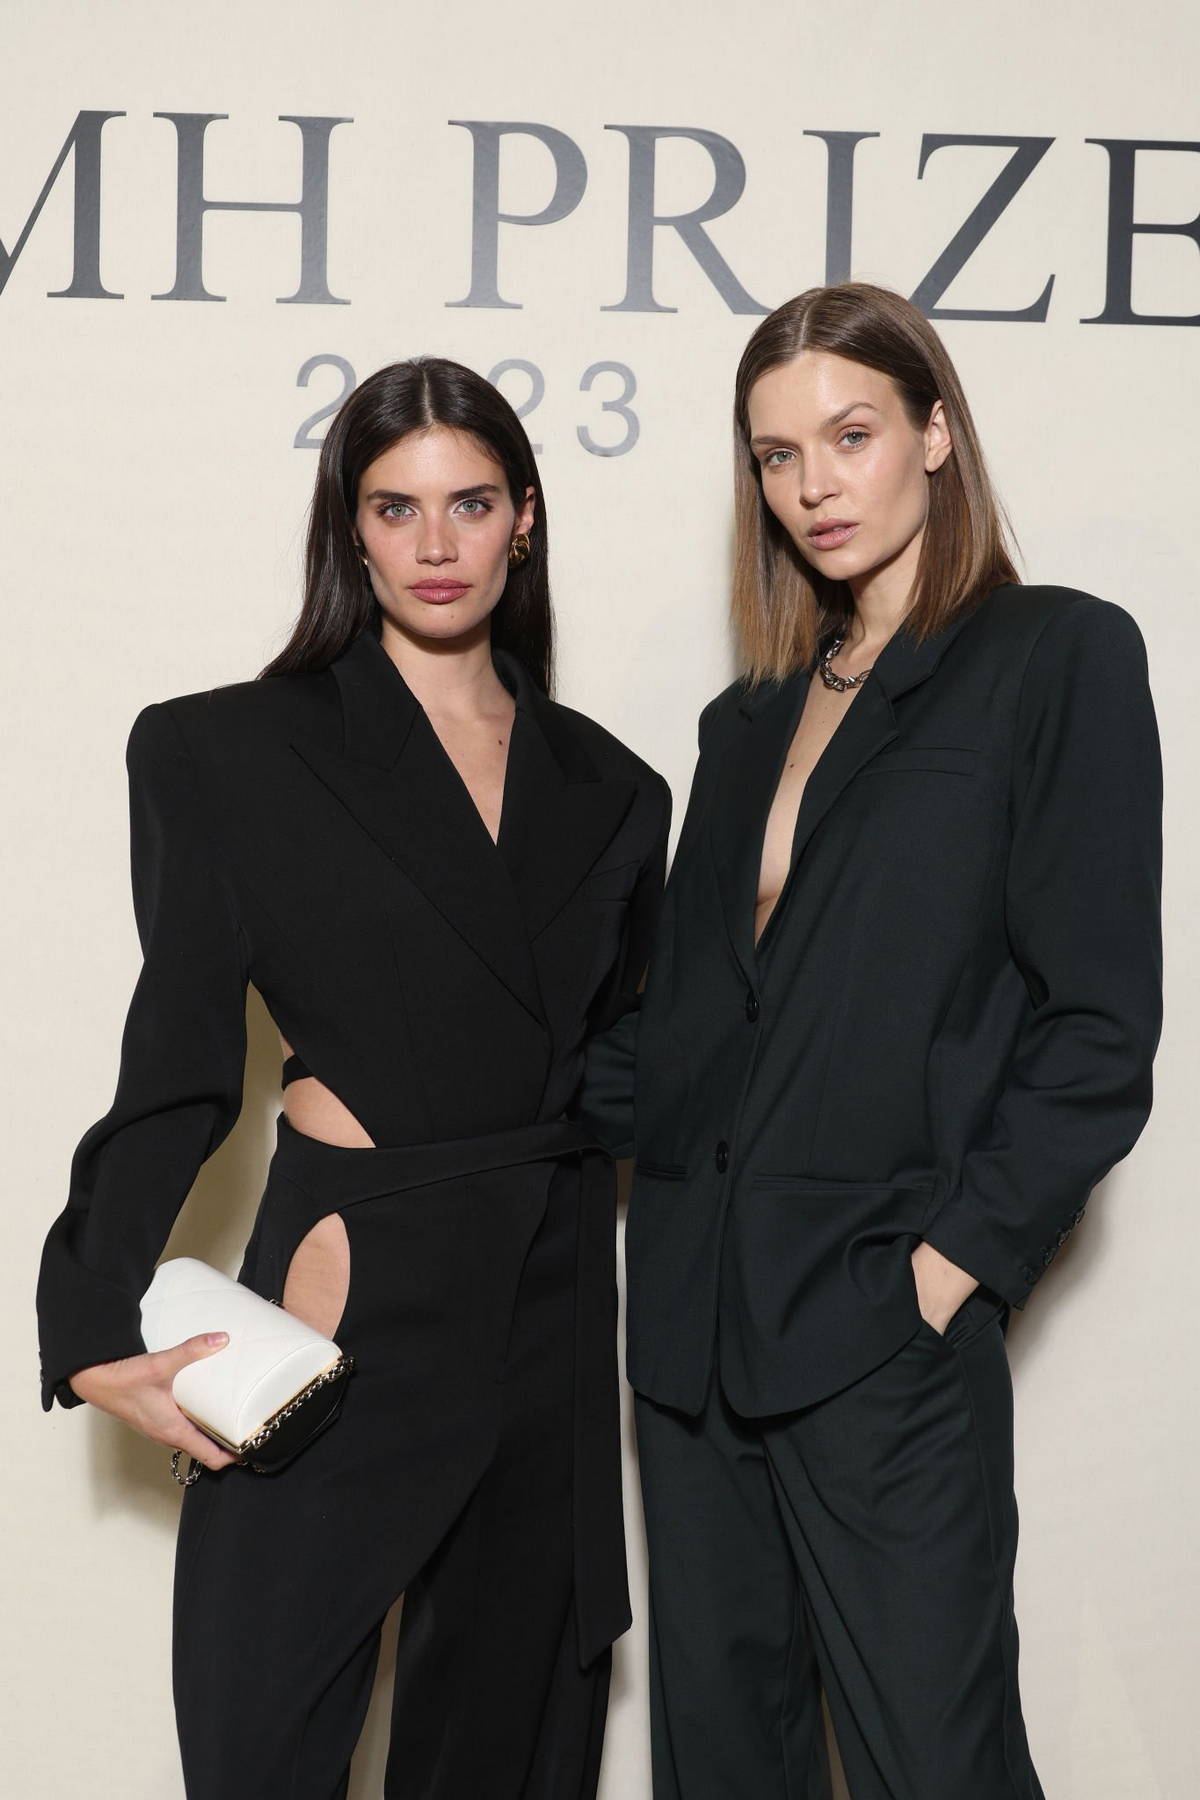 Josephine Skriver and Sara Sampaio attend the LVMH Prize Cocktail